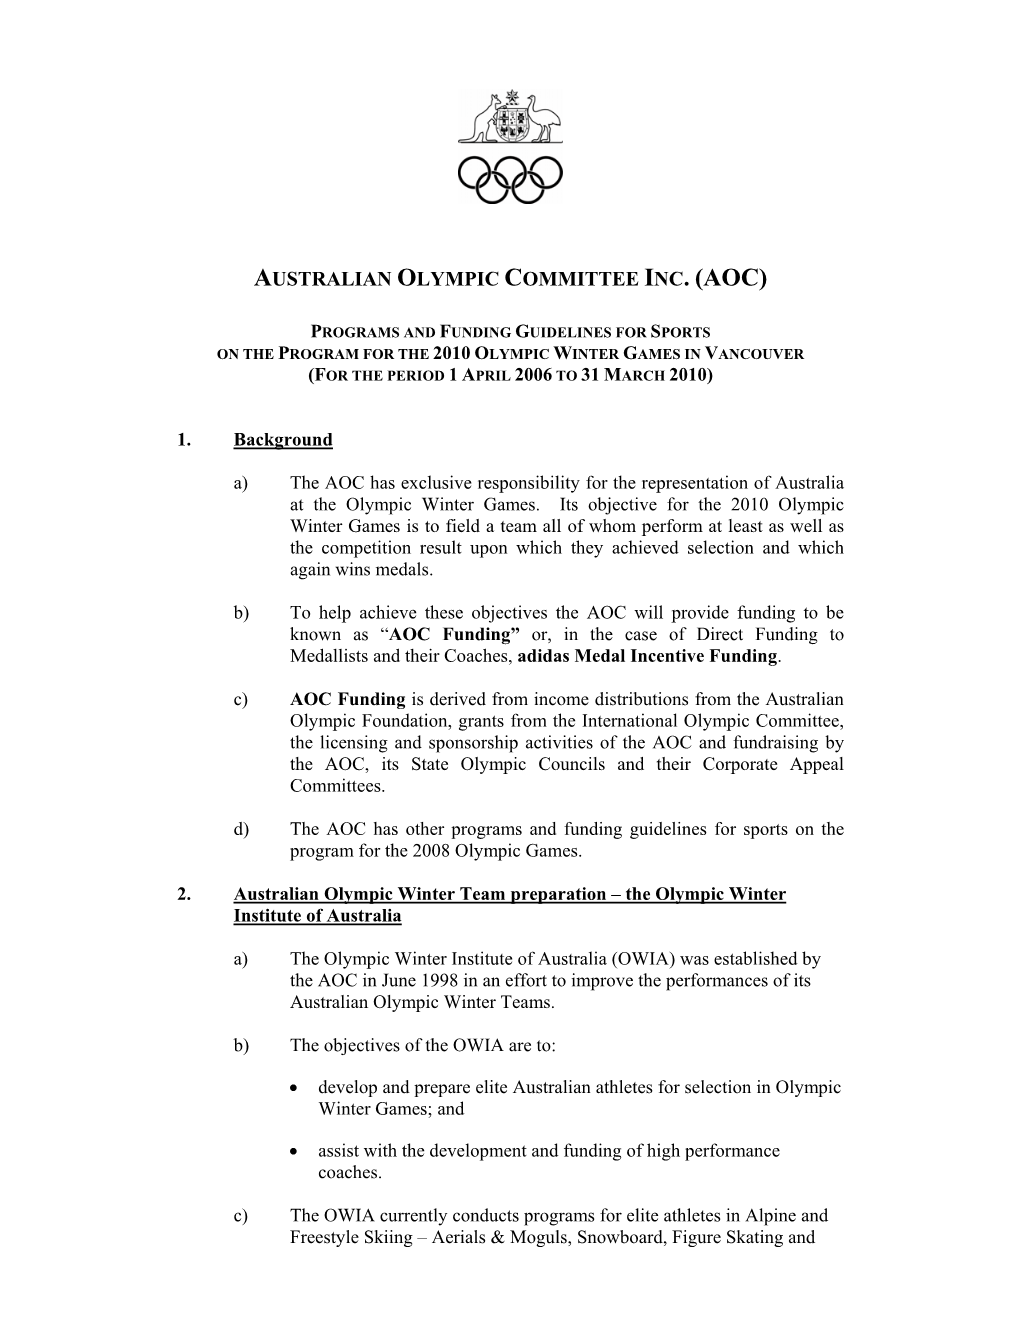 Submissions from Any of Them for More AOC Funding in a Particular Year (And Less in Another Year) in Order to Qualify for the 2010 Olympic Winter Games